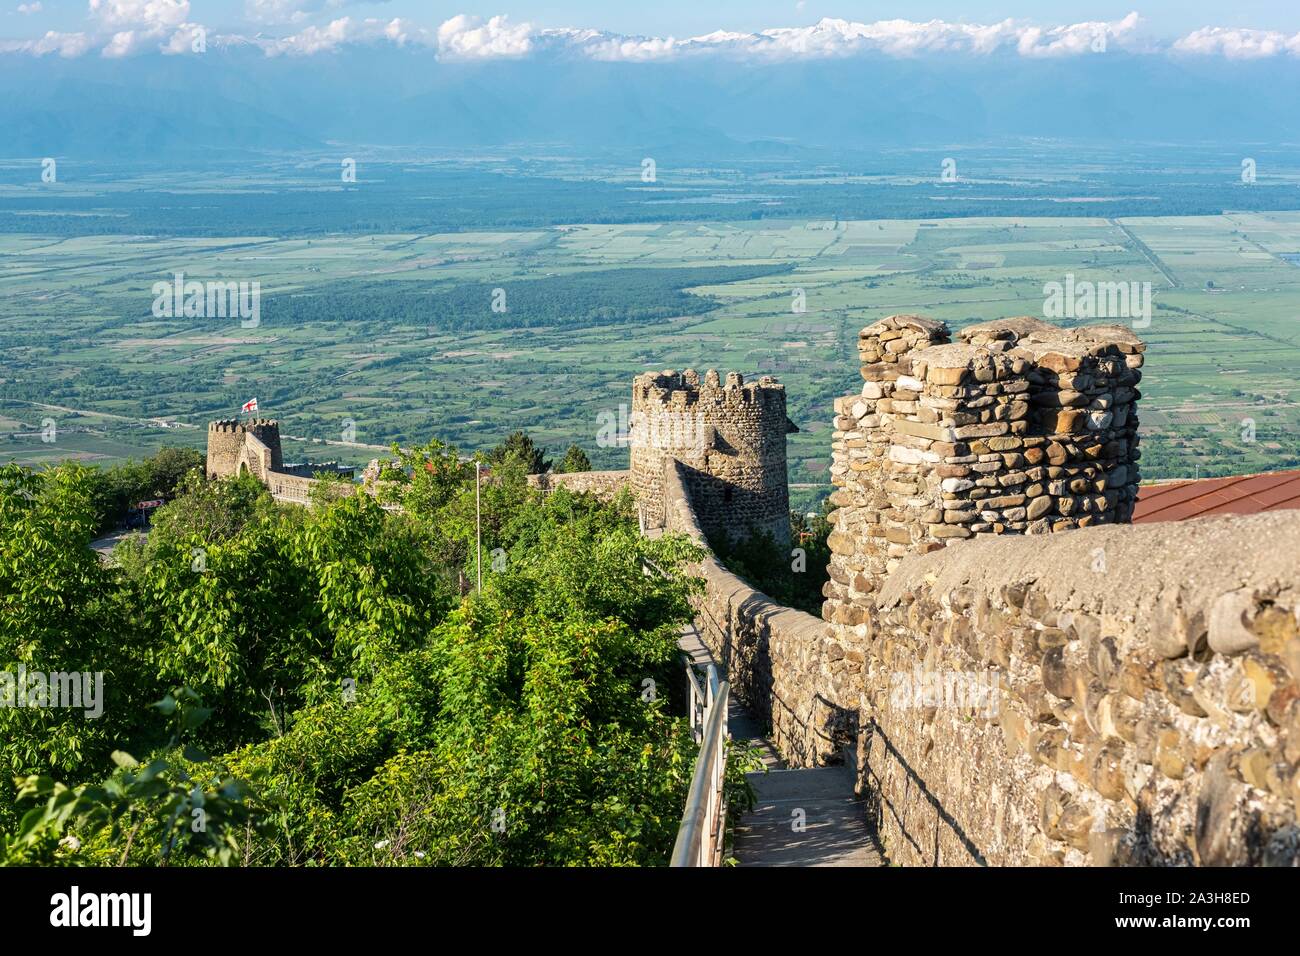 Georgia, Kakheti region, Sighnaghi fortified village, city wall, Greater  Caucasus range covered with snow in the background Stock Photo - Alamy